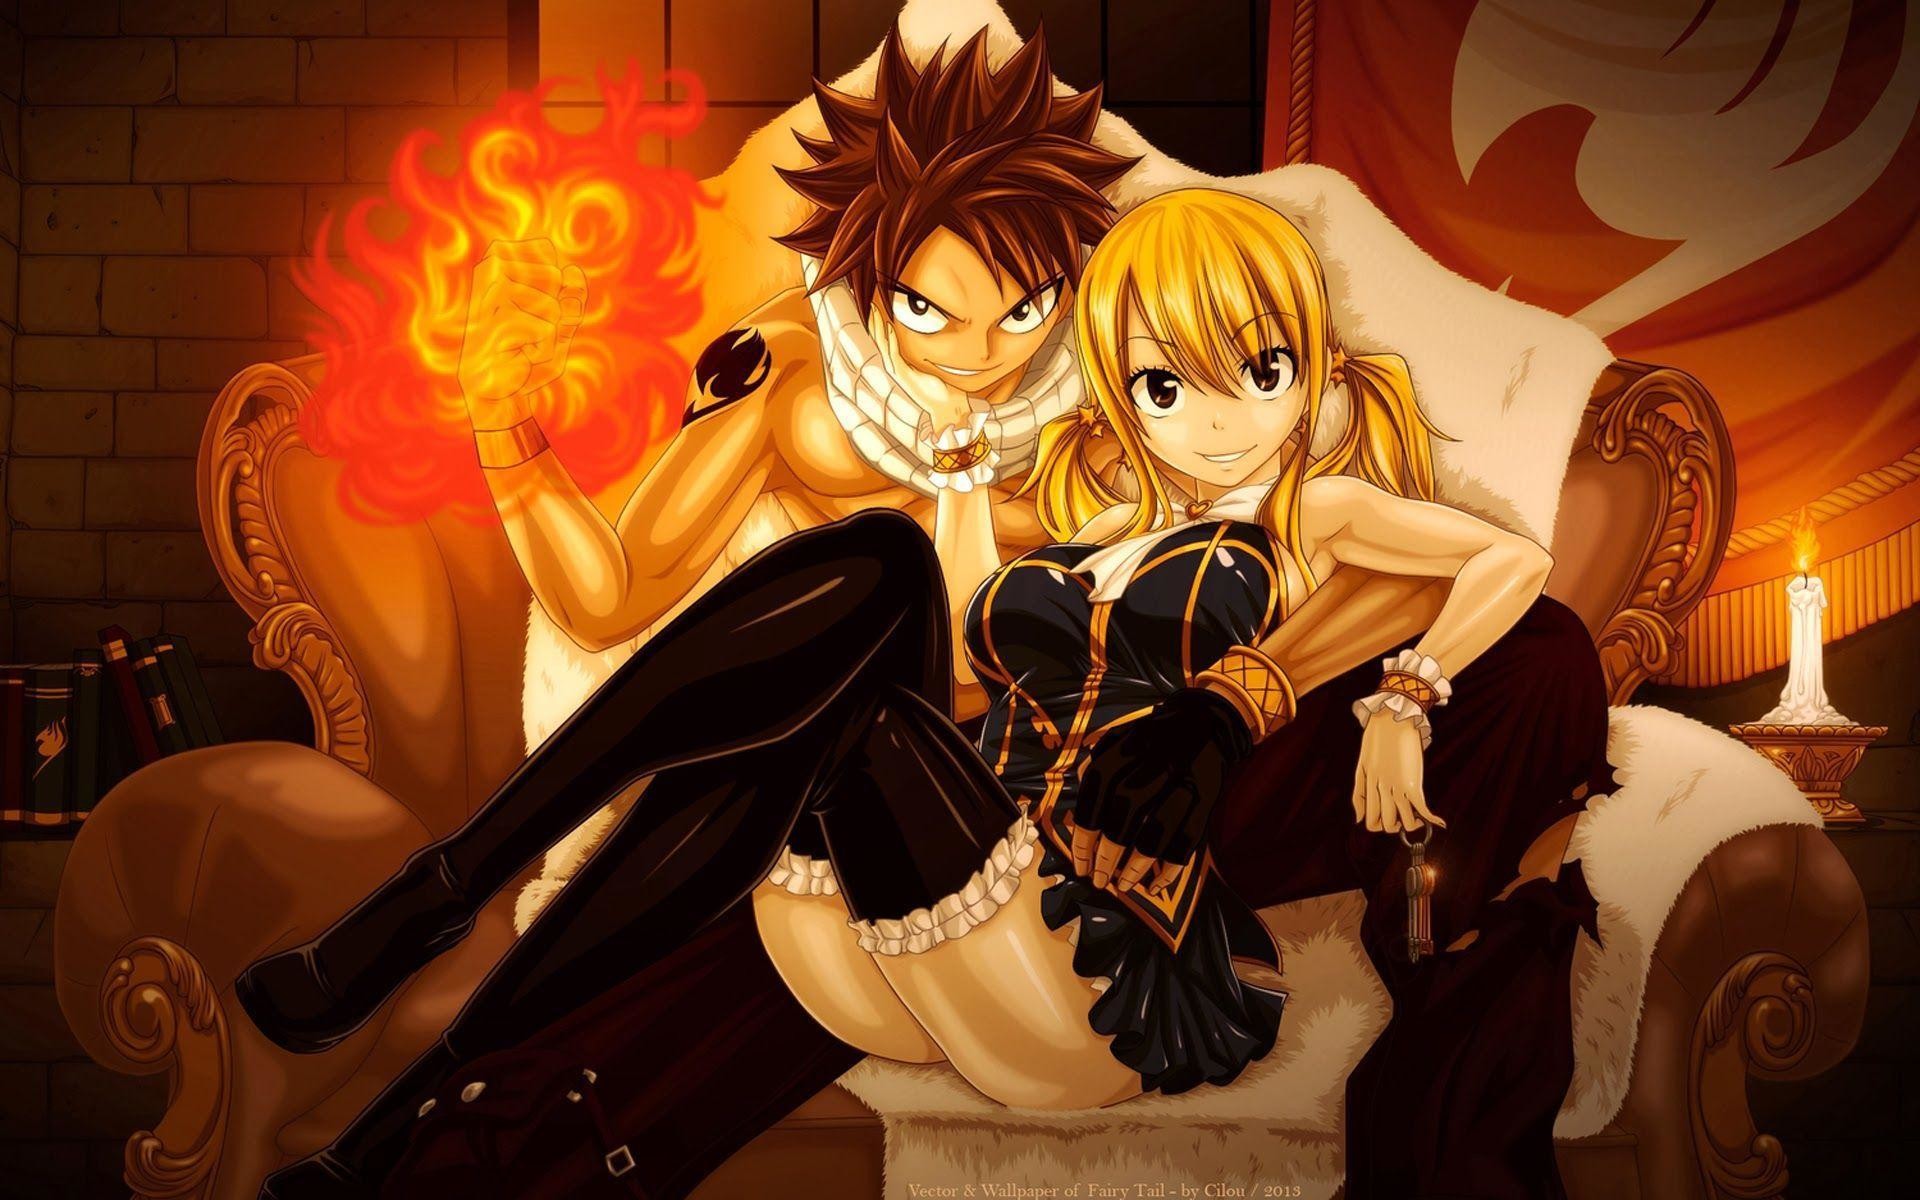 1920x1200 Fairy Tail Backgrounds | Wallpapers, Backgrounds, Images, Art Photos.